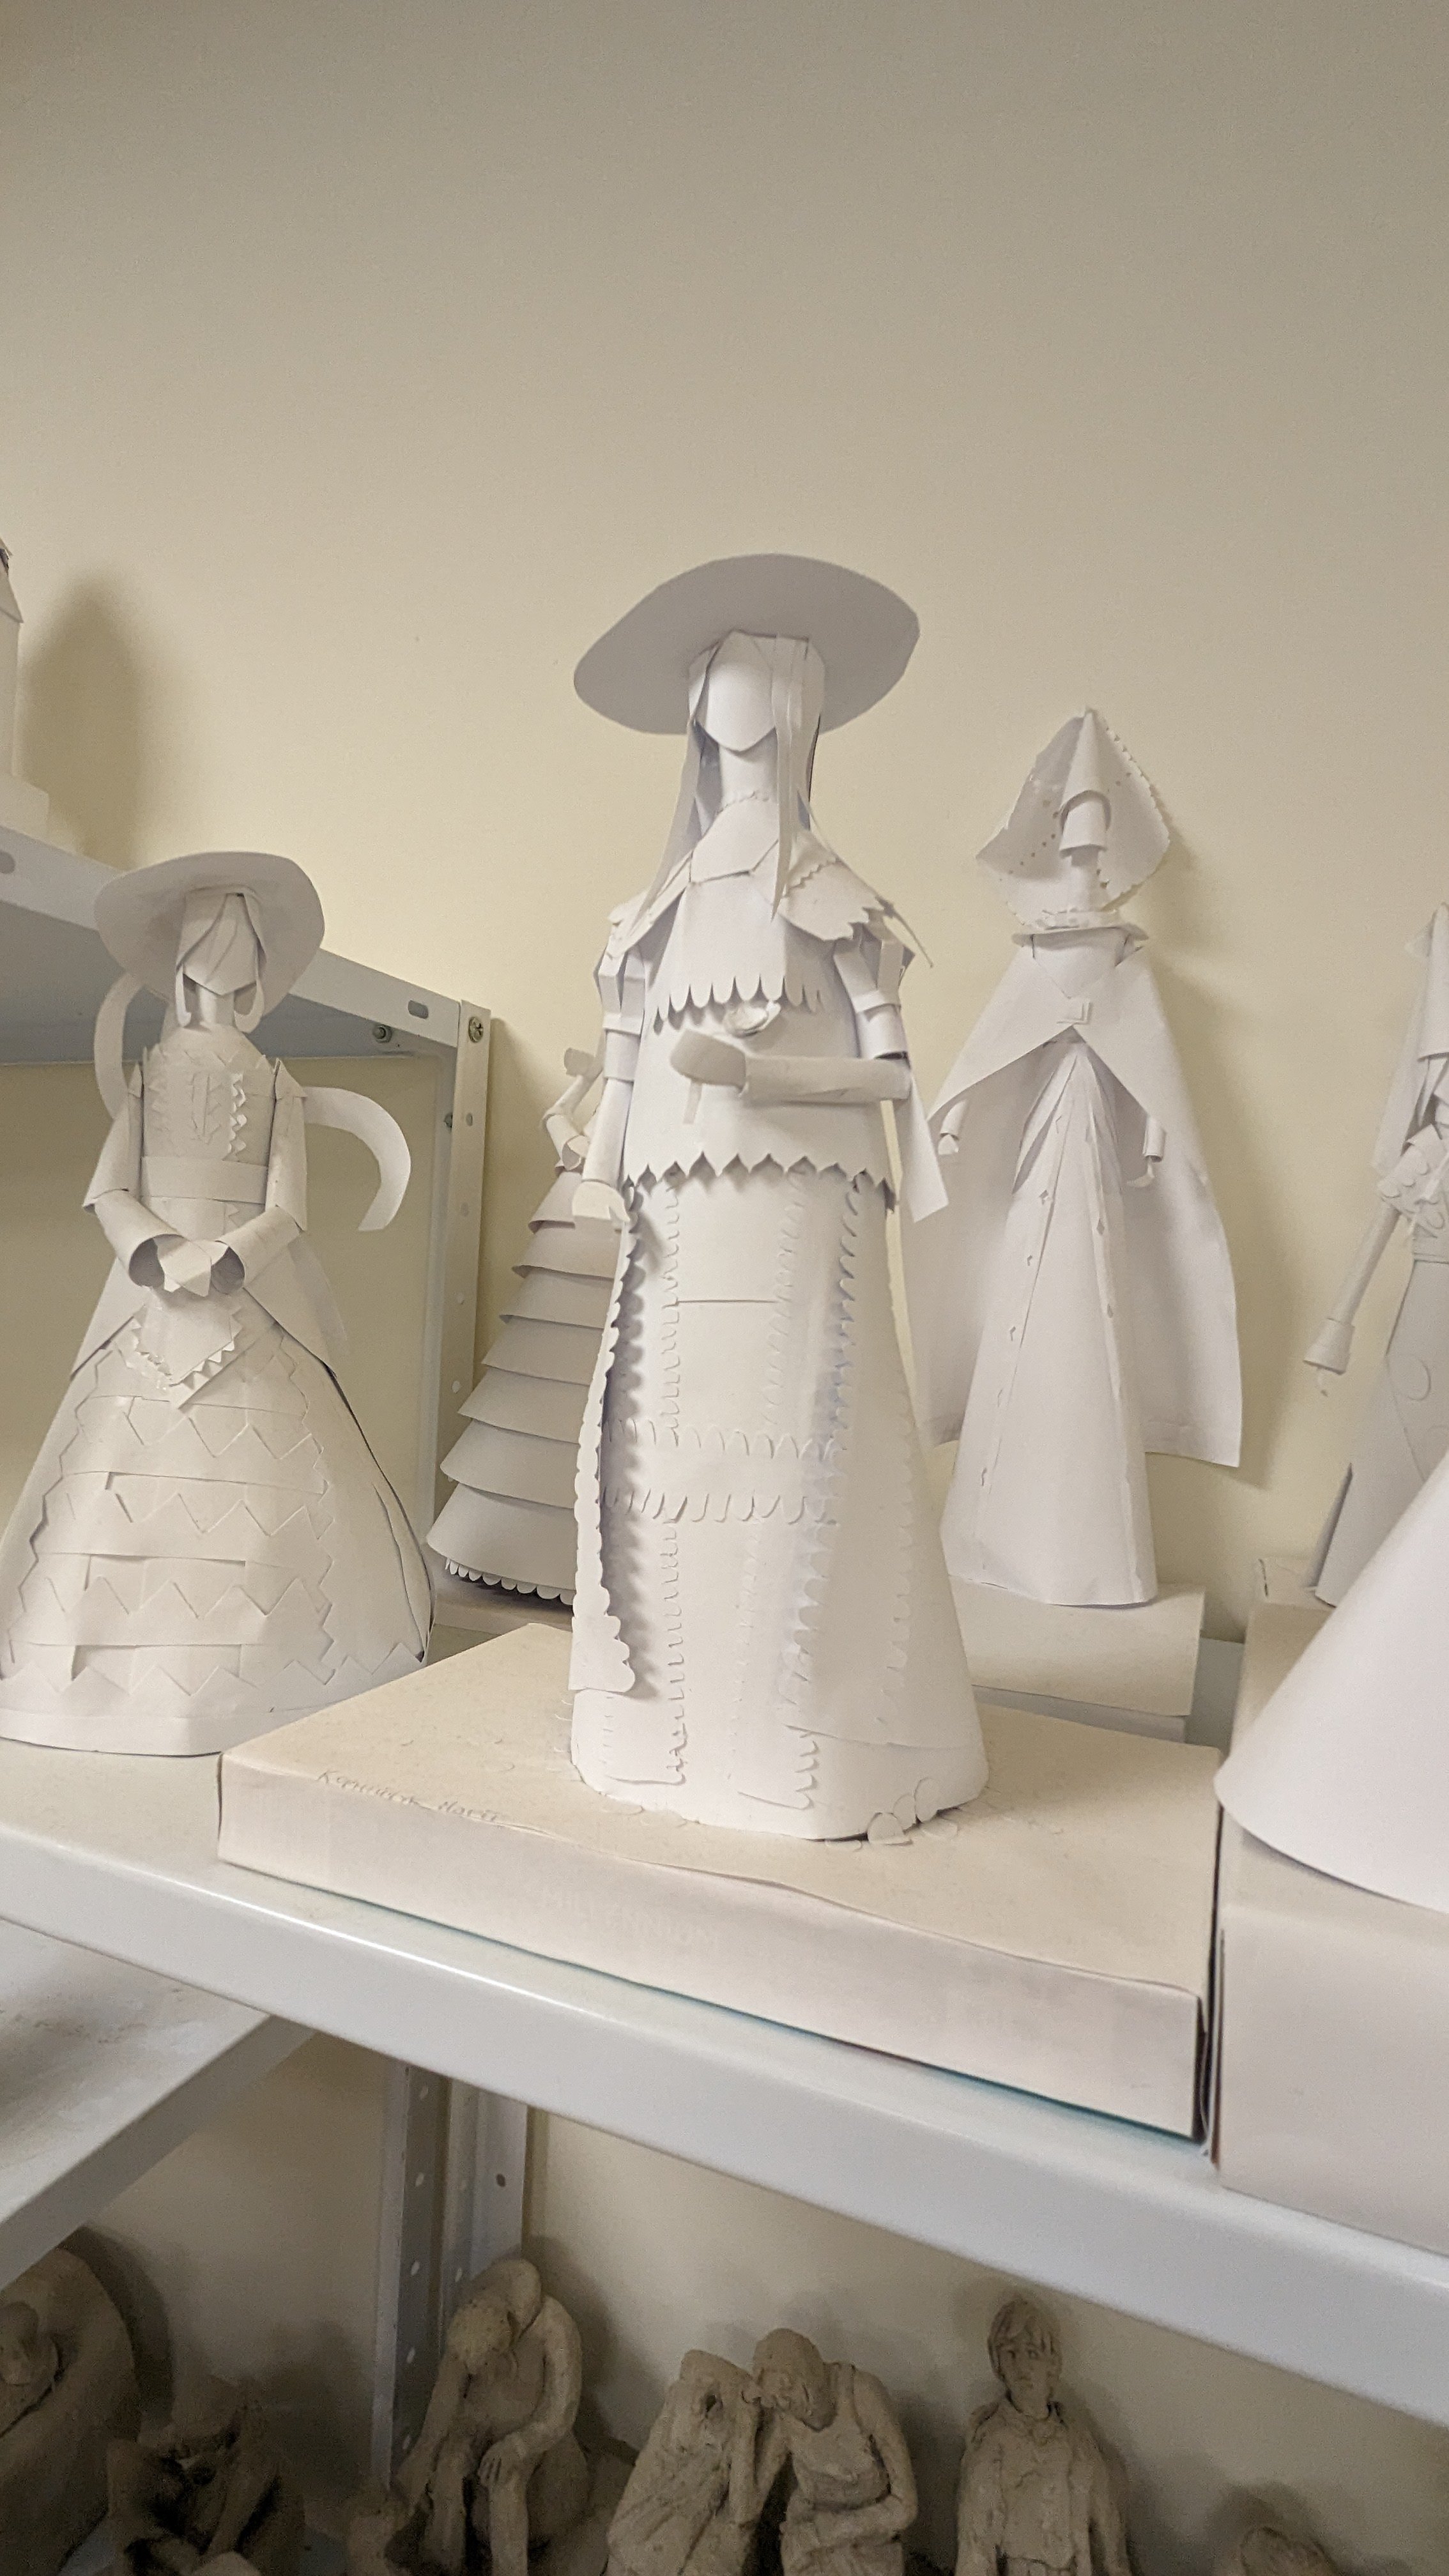 Paper sculpture by students